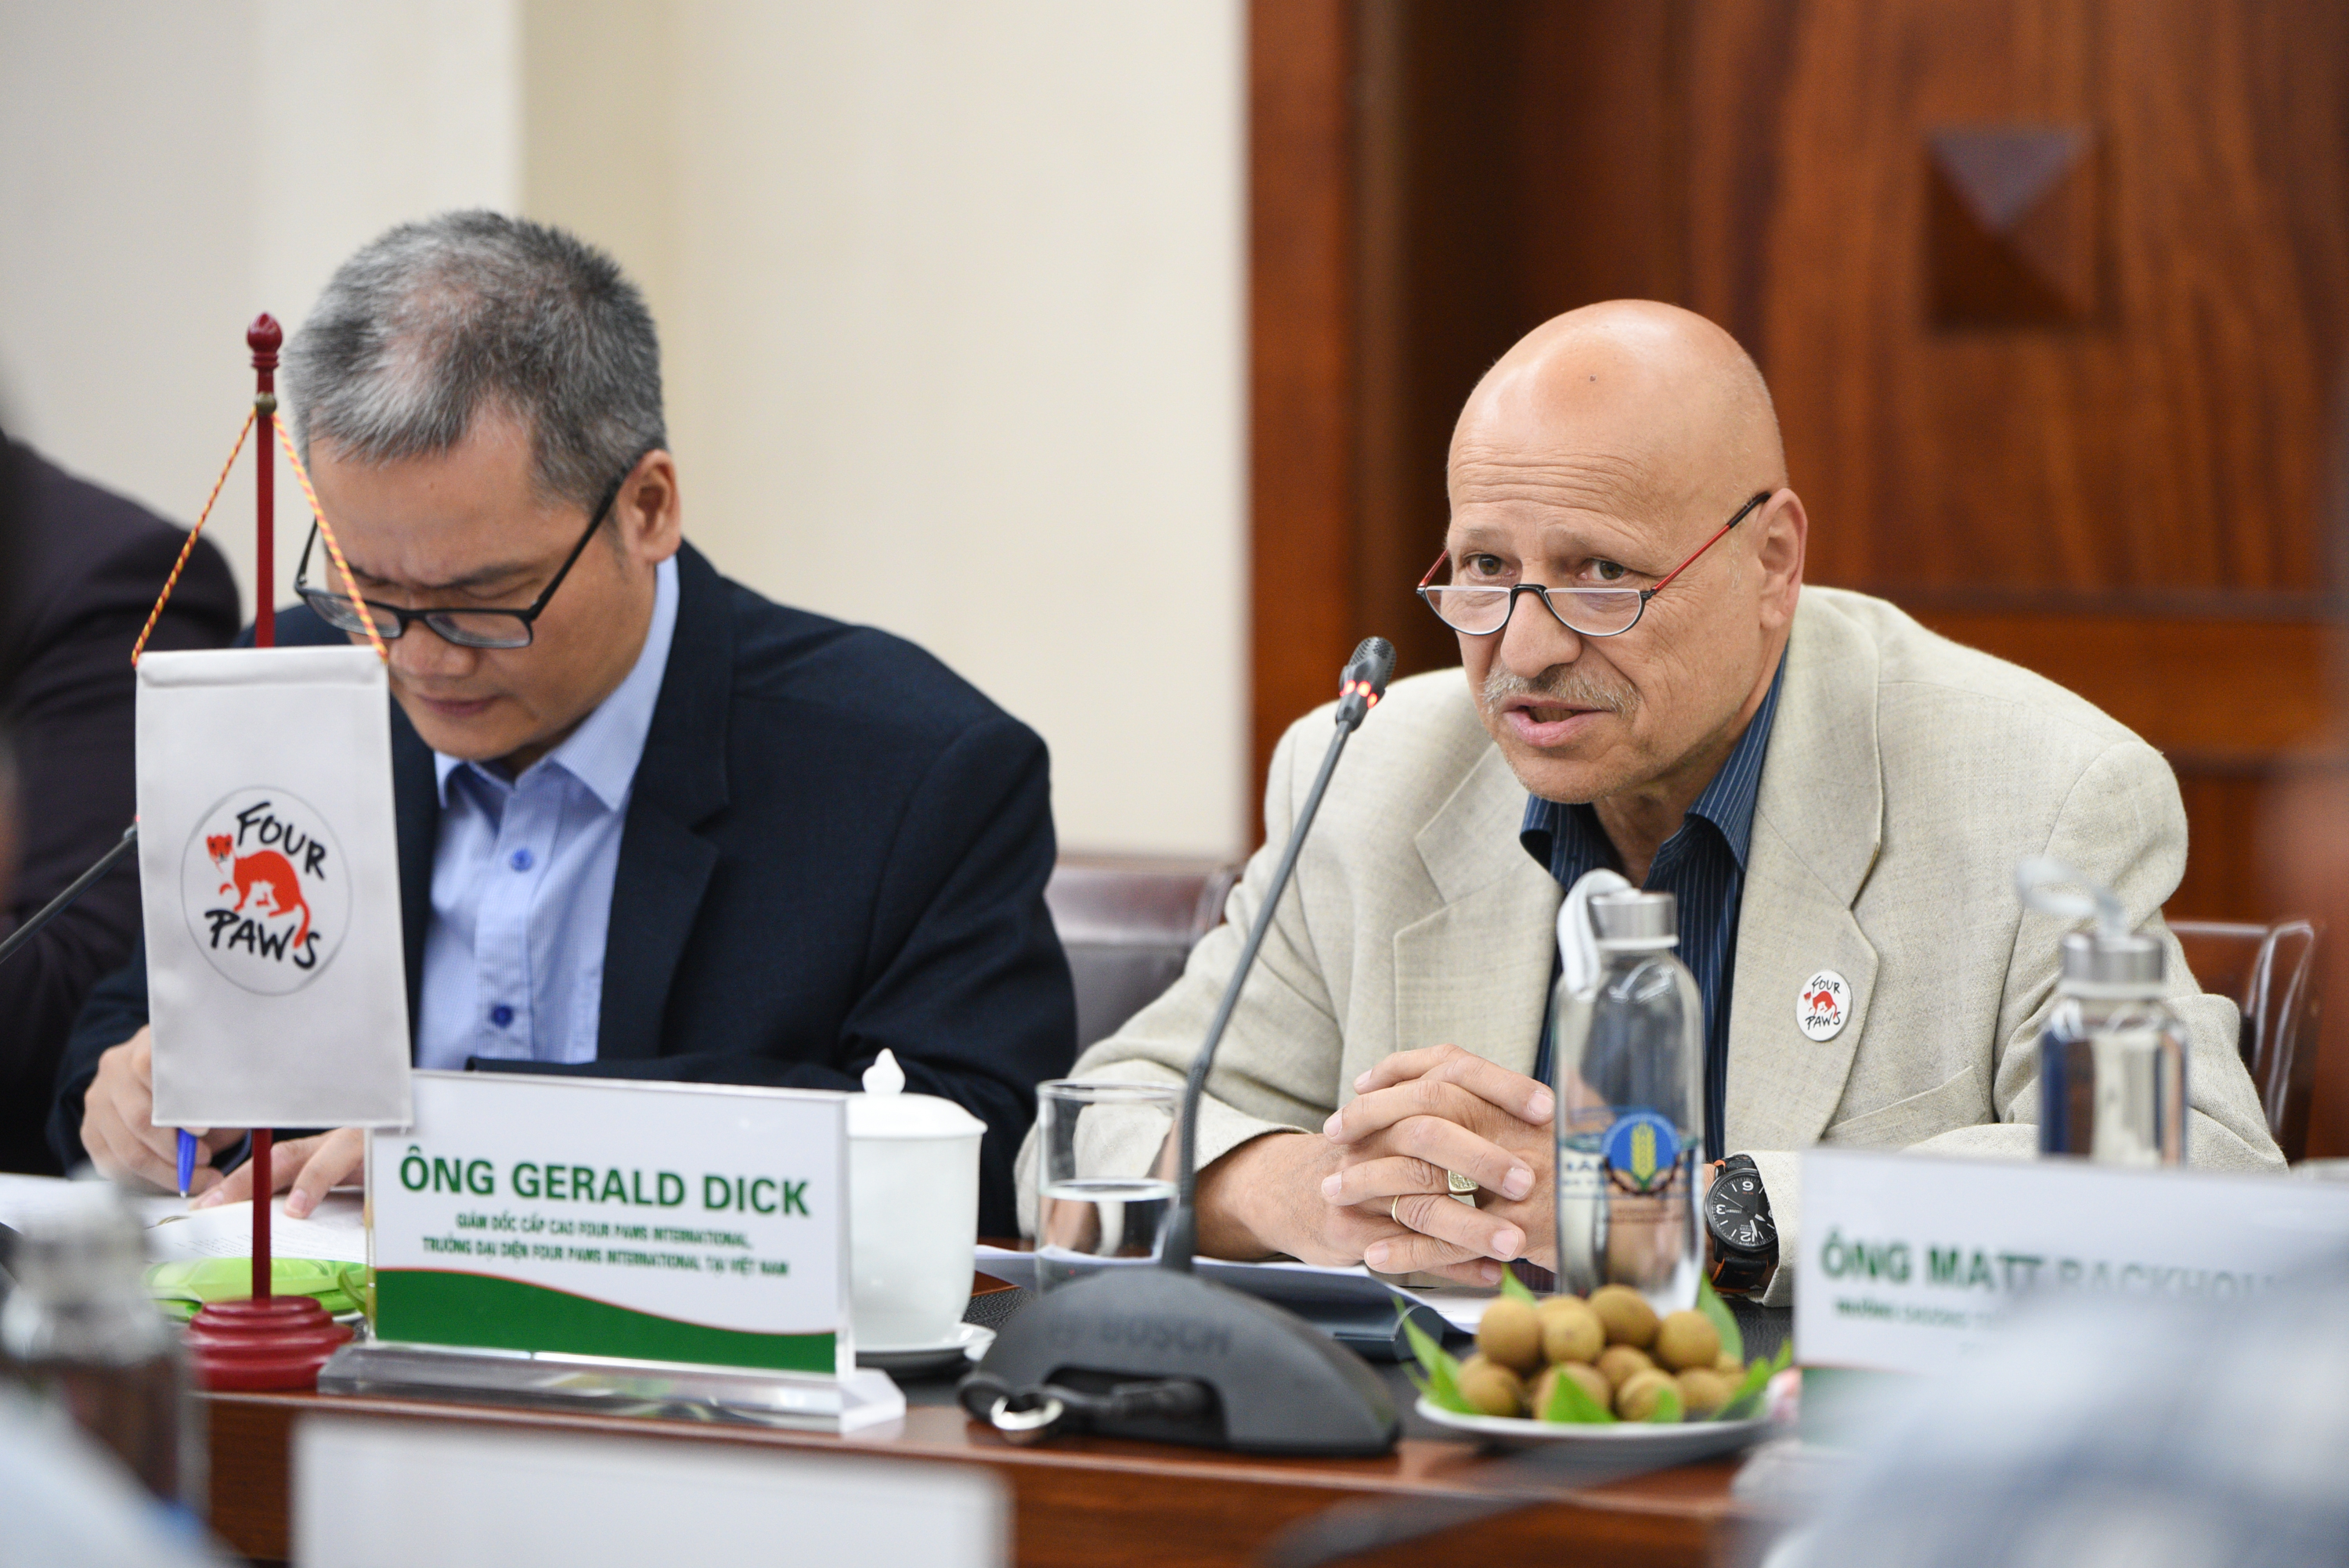 Mr. Gerald Dick, the Chief Representative of FOUR PAWS in Vietnam mentioned the problem of rabies and dog and cat meat trade after joining the One Health Vietnam Partnership framework. Photo: Tung Dinh.